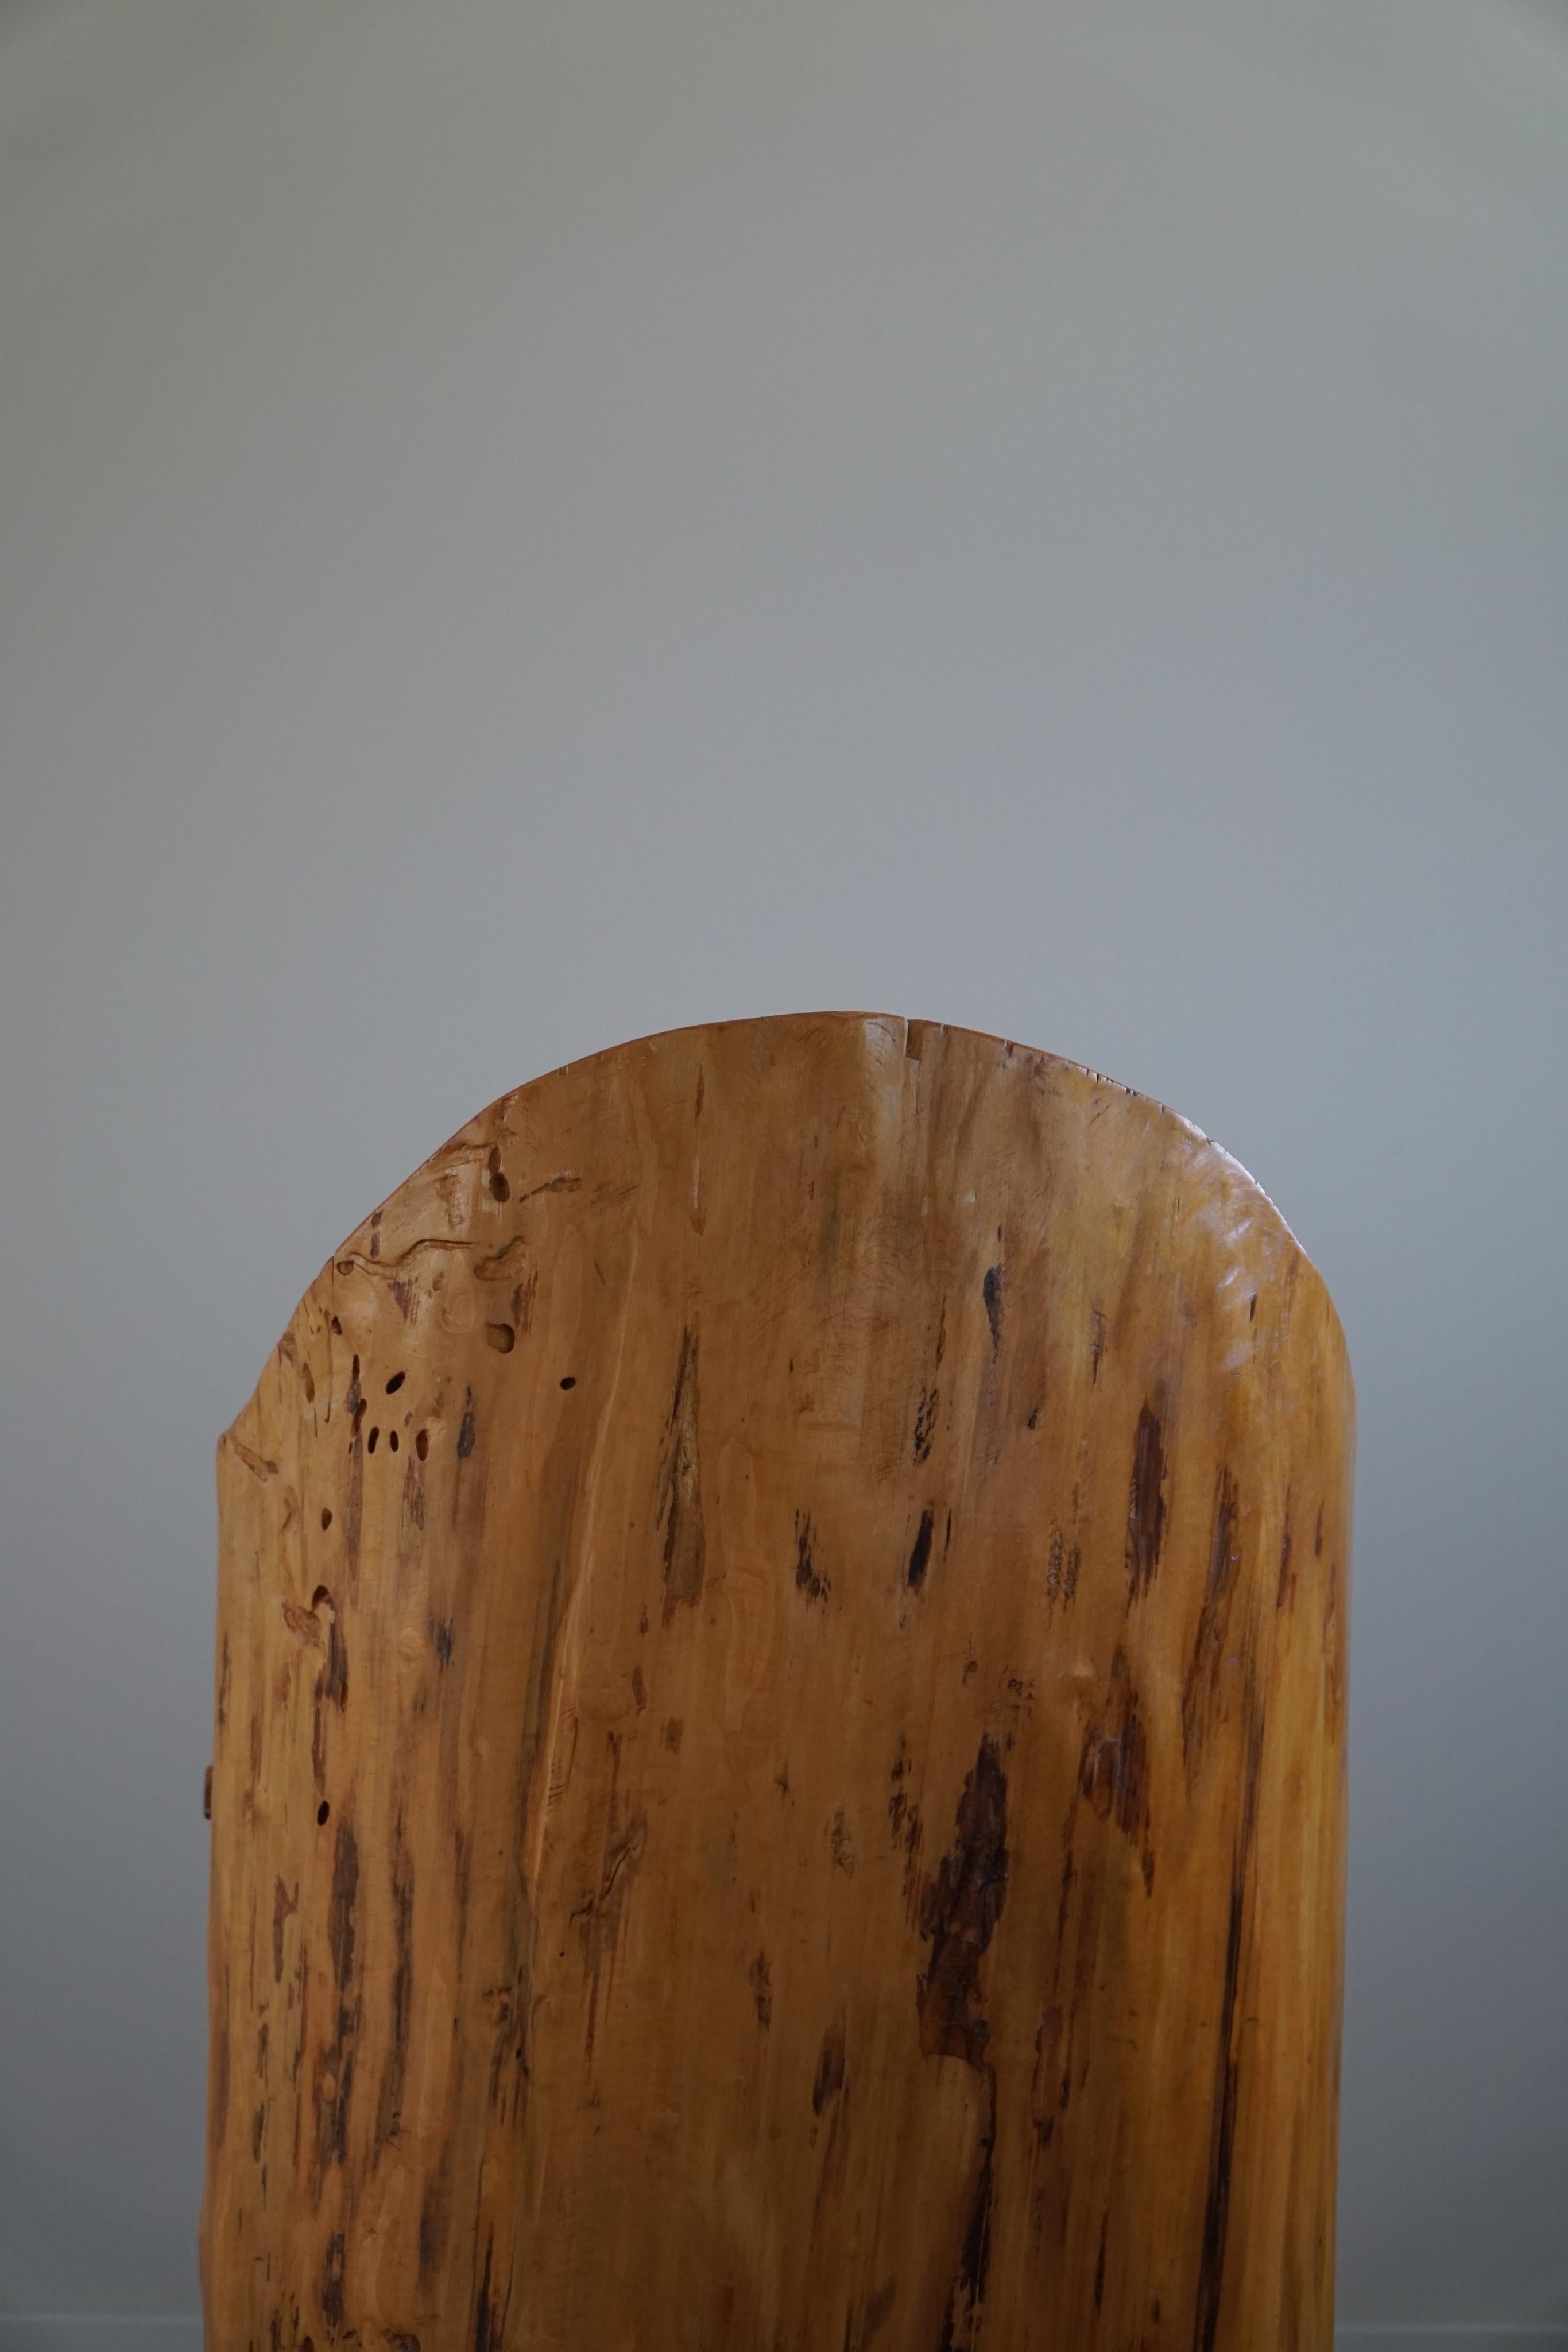 Primitive Stump Chair in Pine, Hand Carved, Swedish Modern, Wabi Sabi, 1960s In Good Condition For Sale In Odense, DK